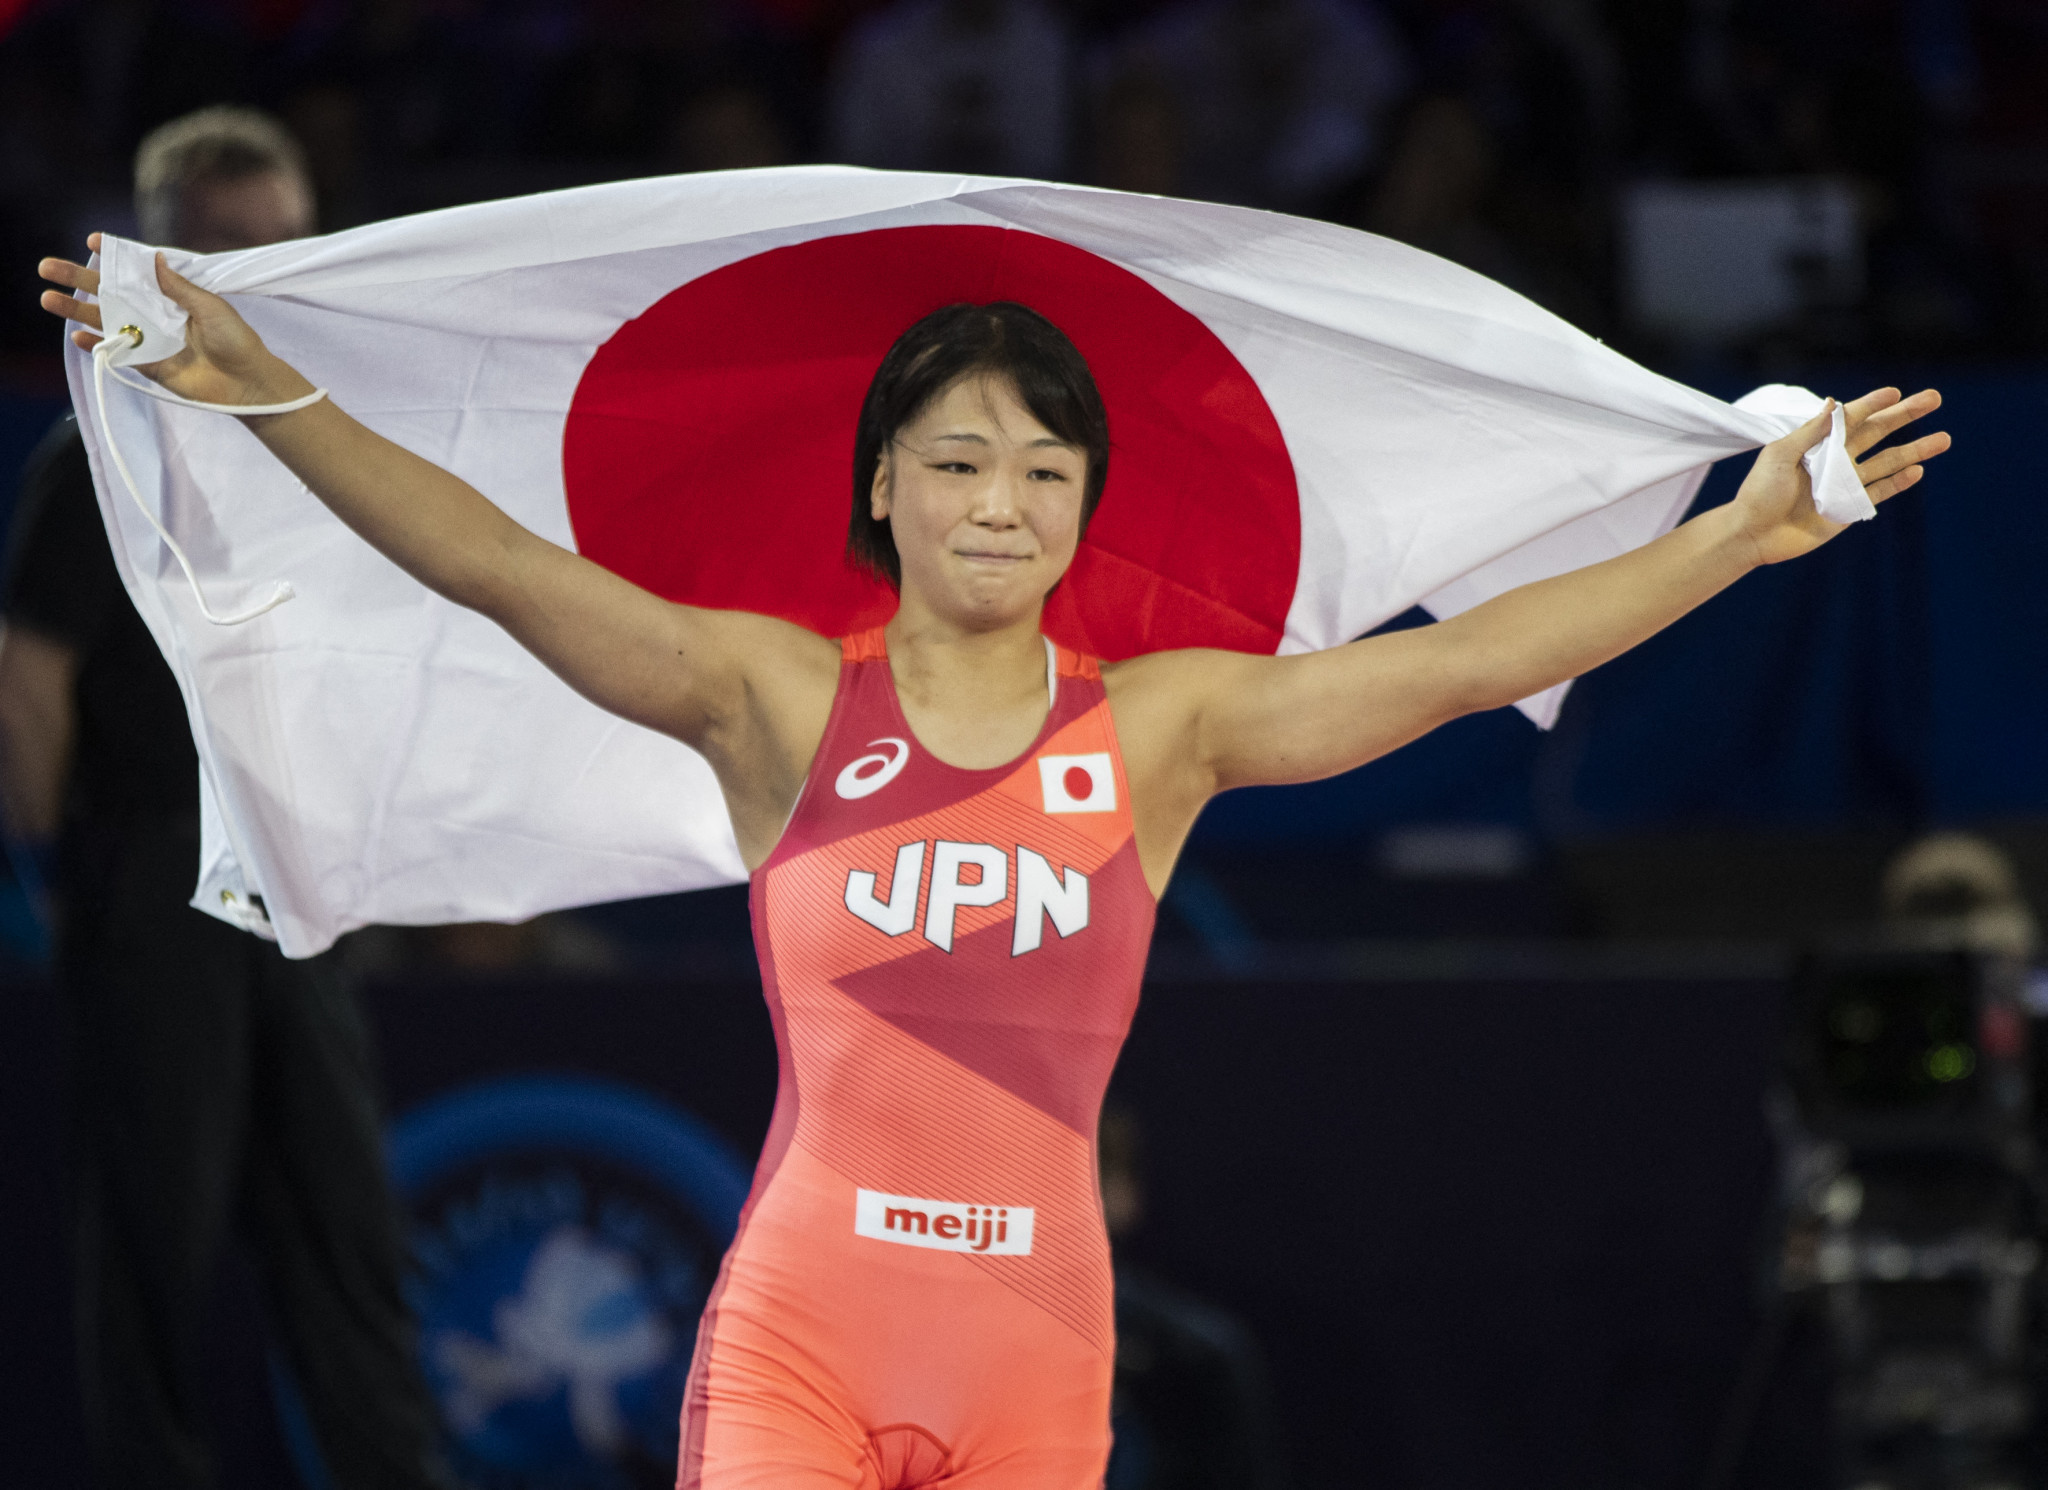 Japan's Akari Fujinami extended her unbeaten run to 114 contests by winning gold in the Asian Championships ©Getty Images